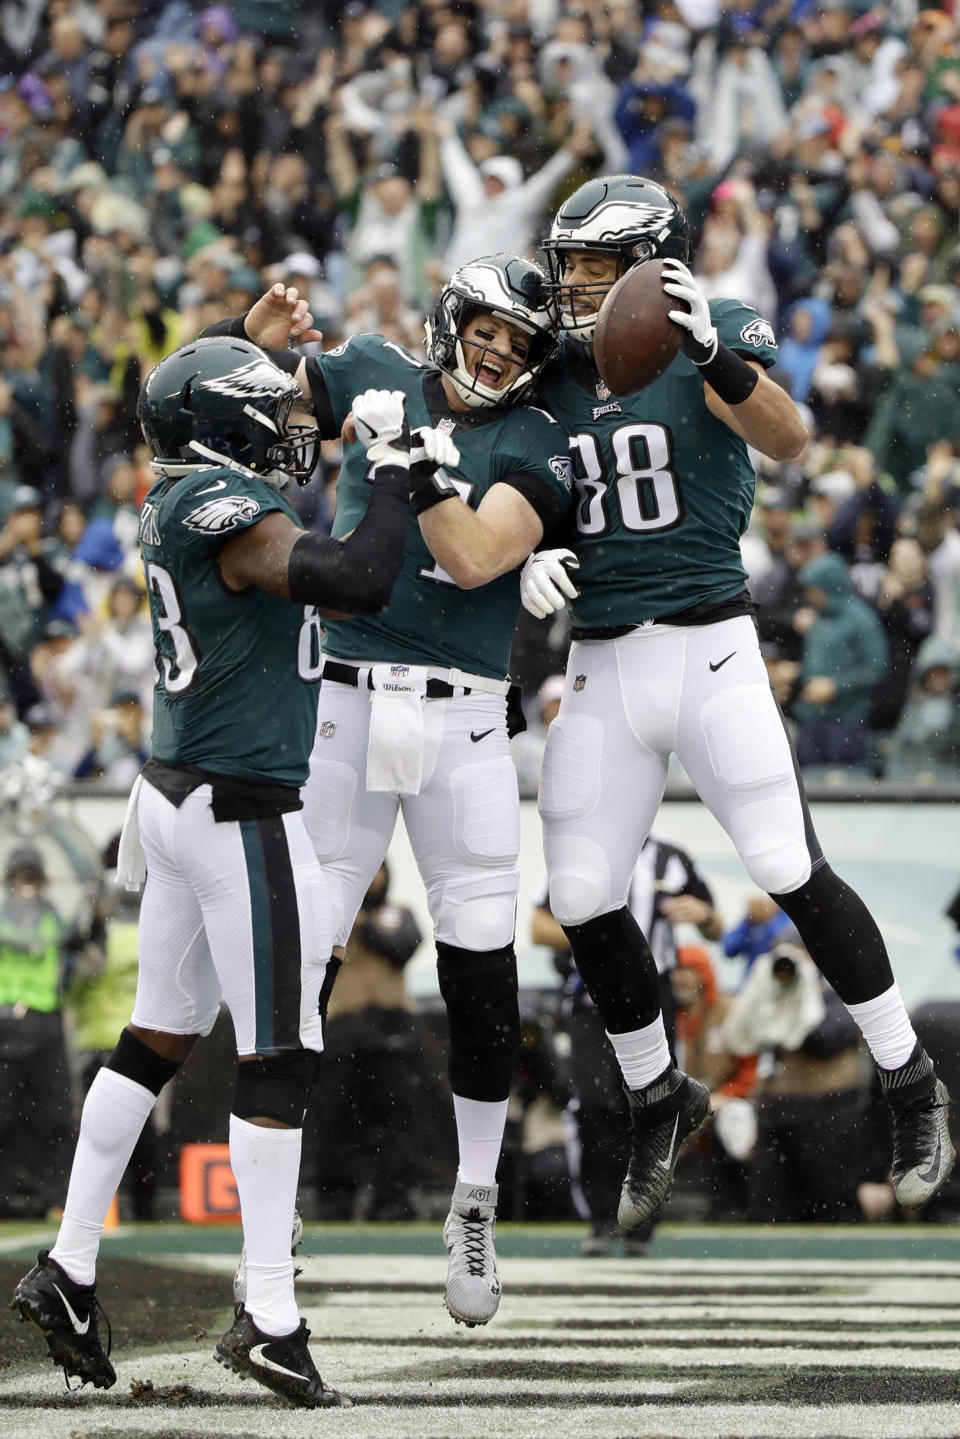 Philadelphia Eagles' Dallas Goedert, from right, Carson Wentz and Josh Perkins celebrate after Goedert's touchdown during the first half of an NFL football game against the Indianapolis Colts, Sunday, Sept. 23, 2018, in Philadelphia. (AP Photo/Matt Rourke)